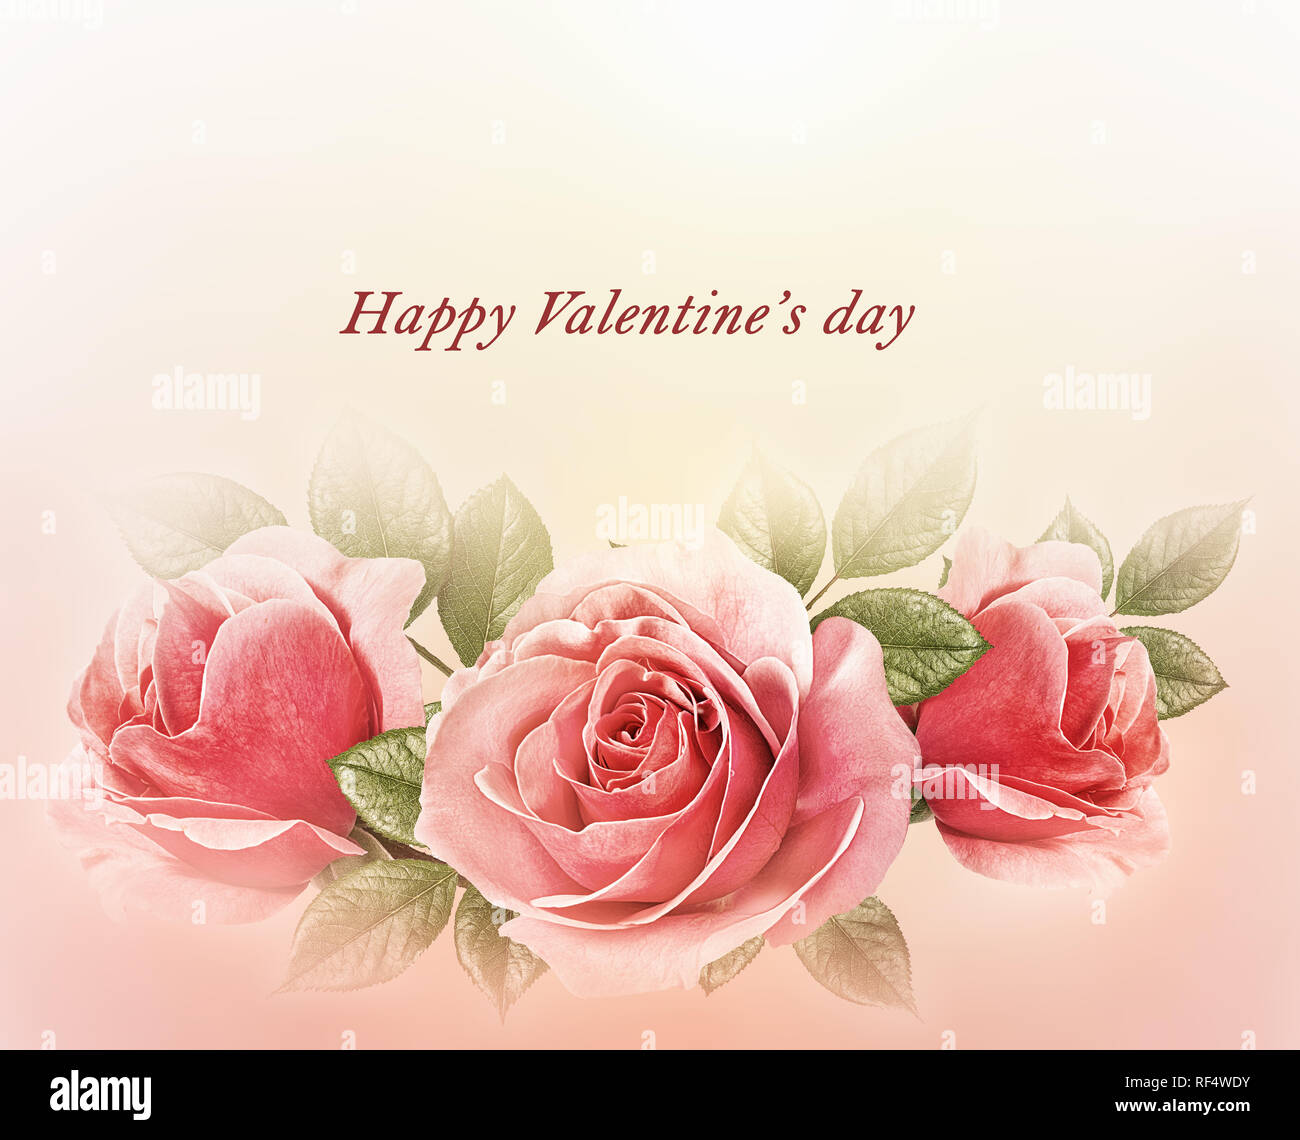 Happy Valentine's day. Valentines day card concept.Valentines Day background with roses. Stock Photo